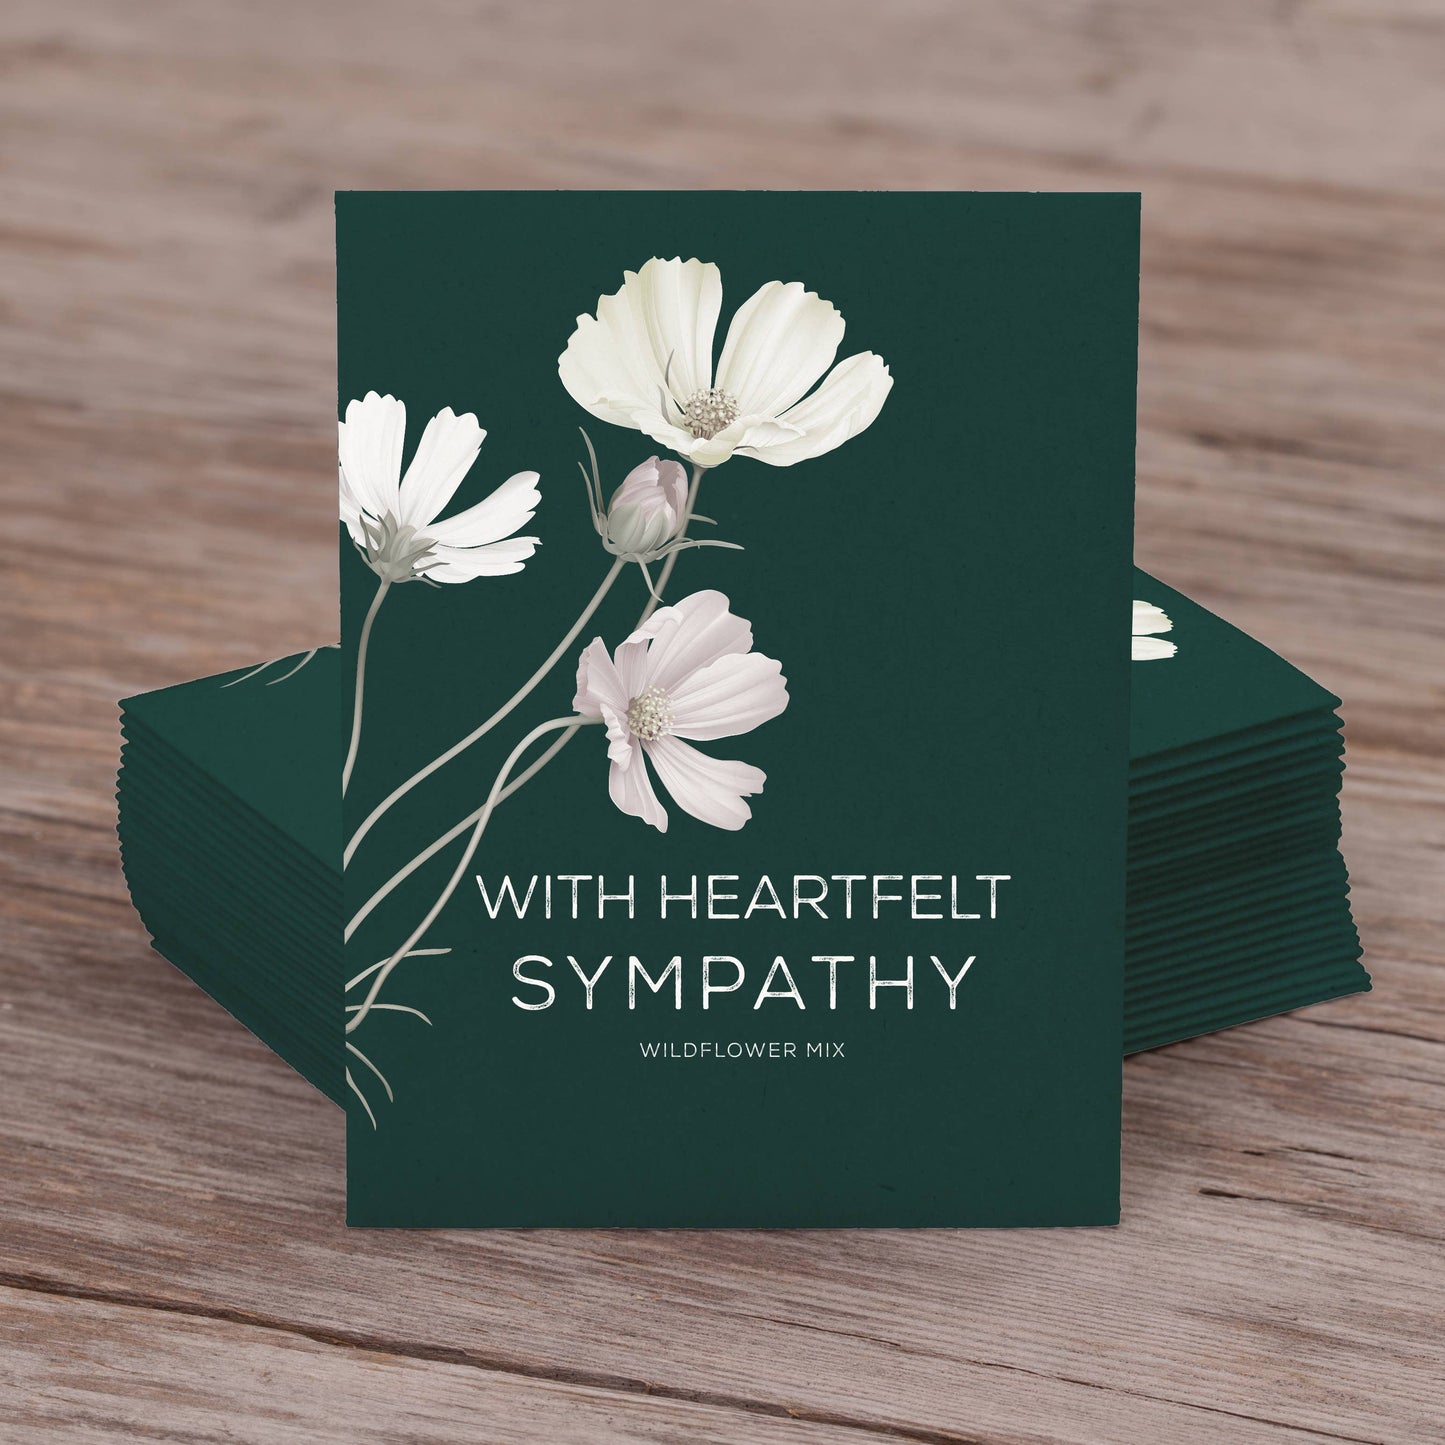 With Heartfelt Sympathy - Wildflower Mix Seed Packets